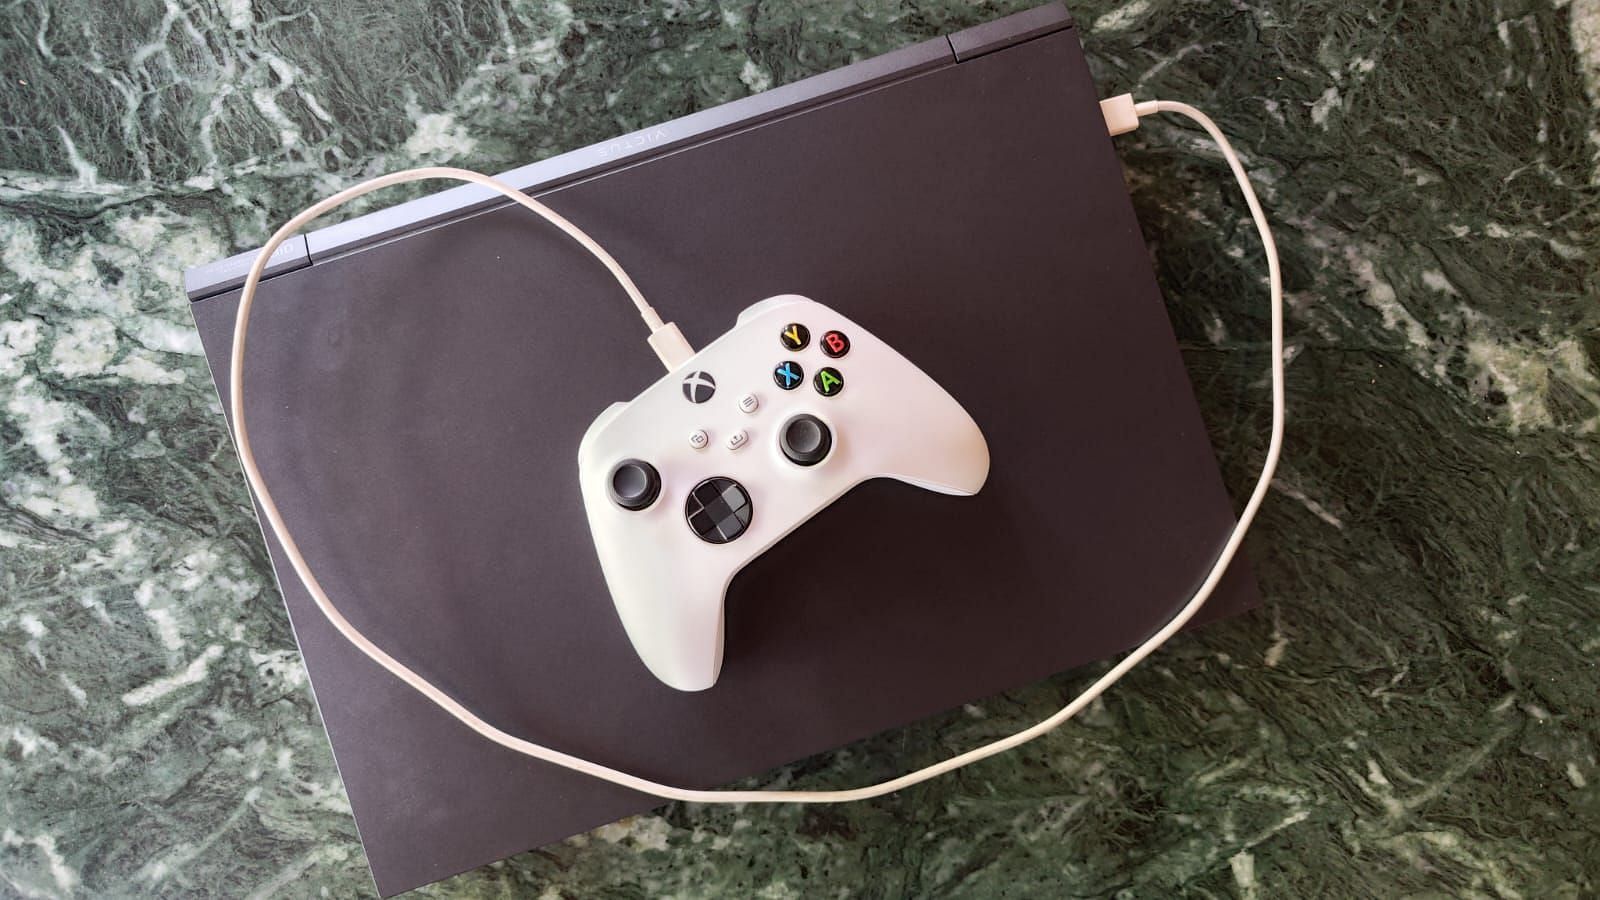 Connect the Xbox controller via a USB cable to your PC (Image via Sportskeeda)